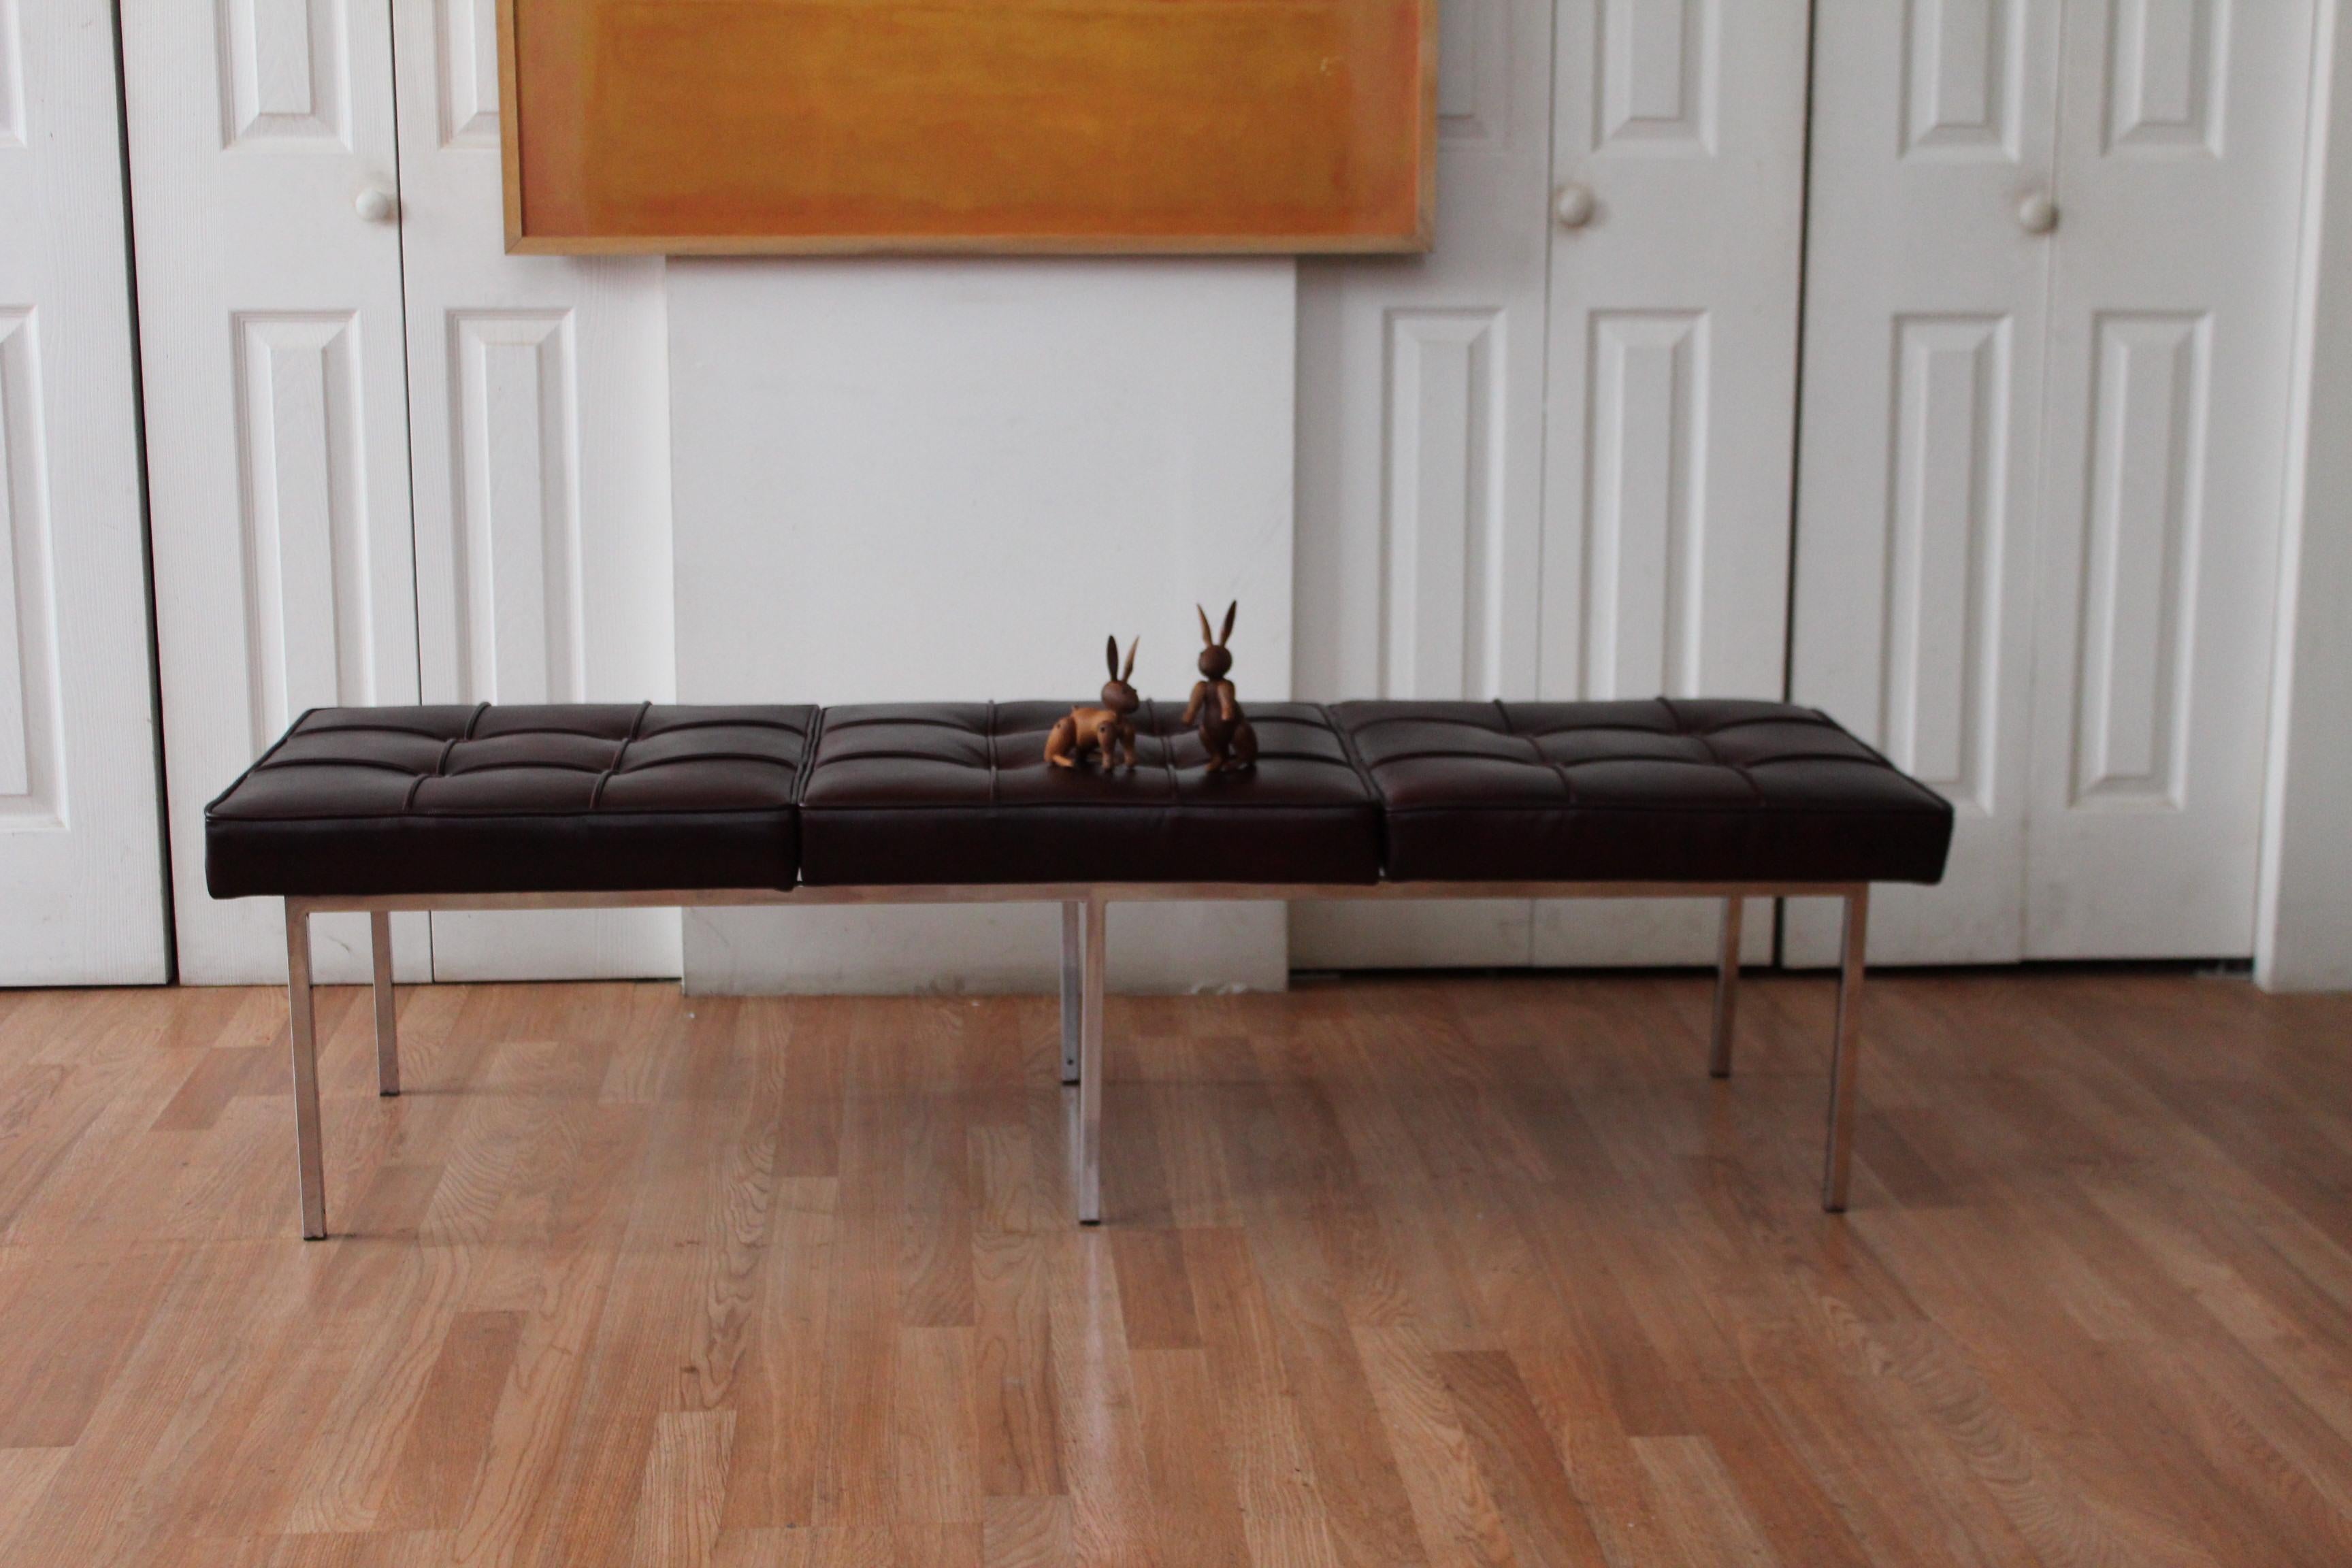 Long, lean, sexy & mean! That's what comes to mind when viewing this newly upholstered, OXBLOOD LEATHER  tufted, 